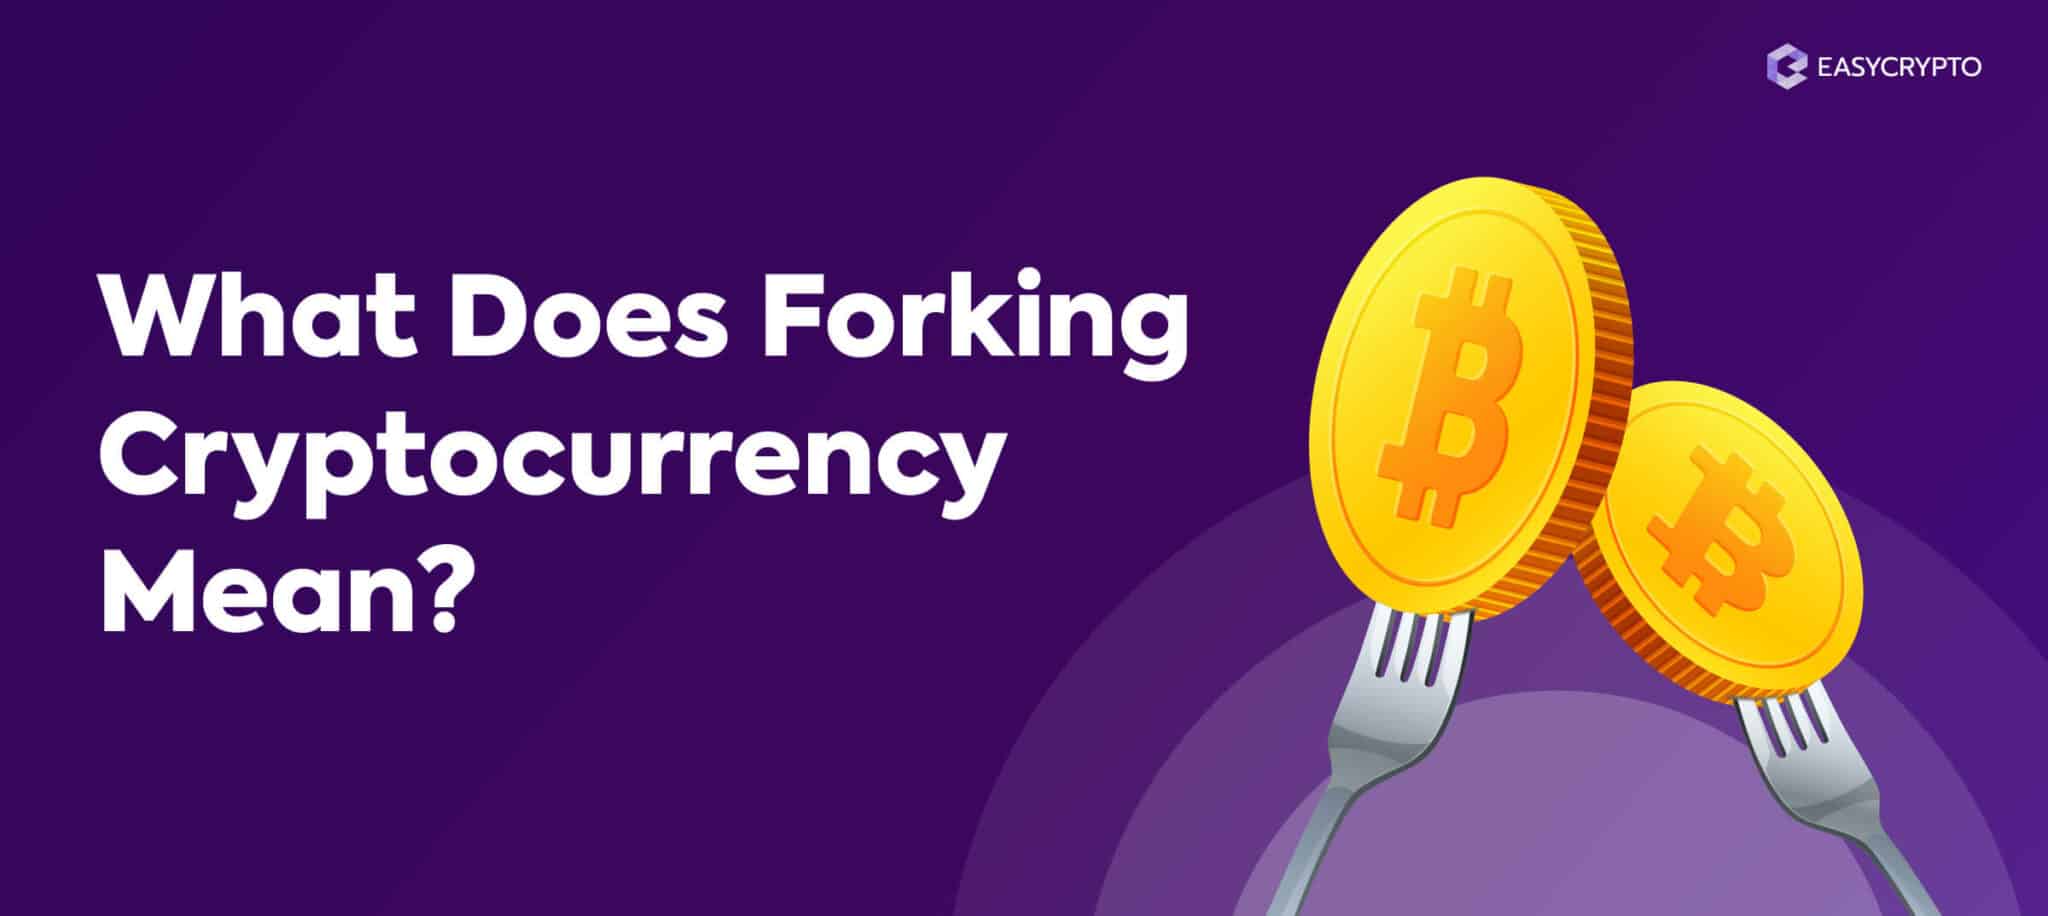 what is forking cryptocurrency